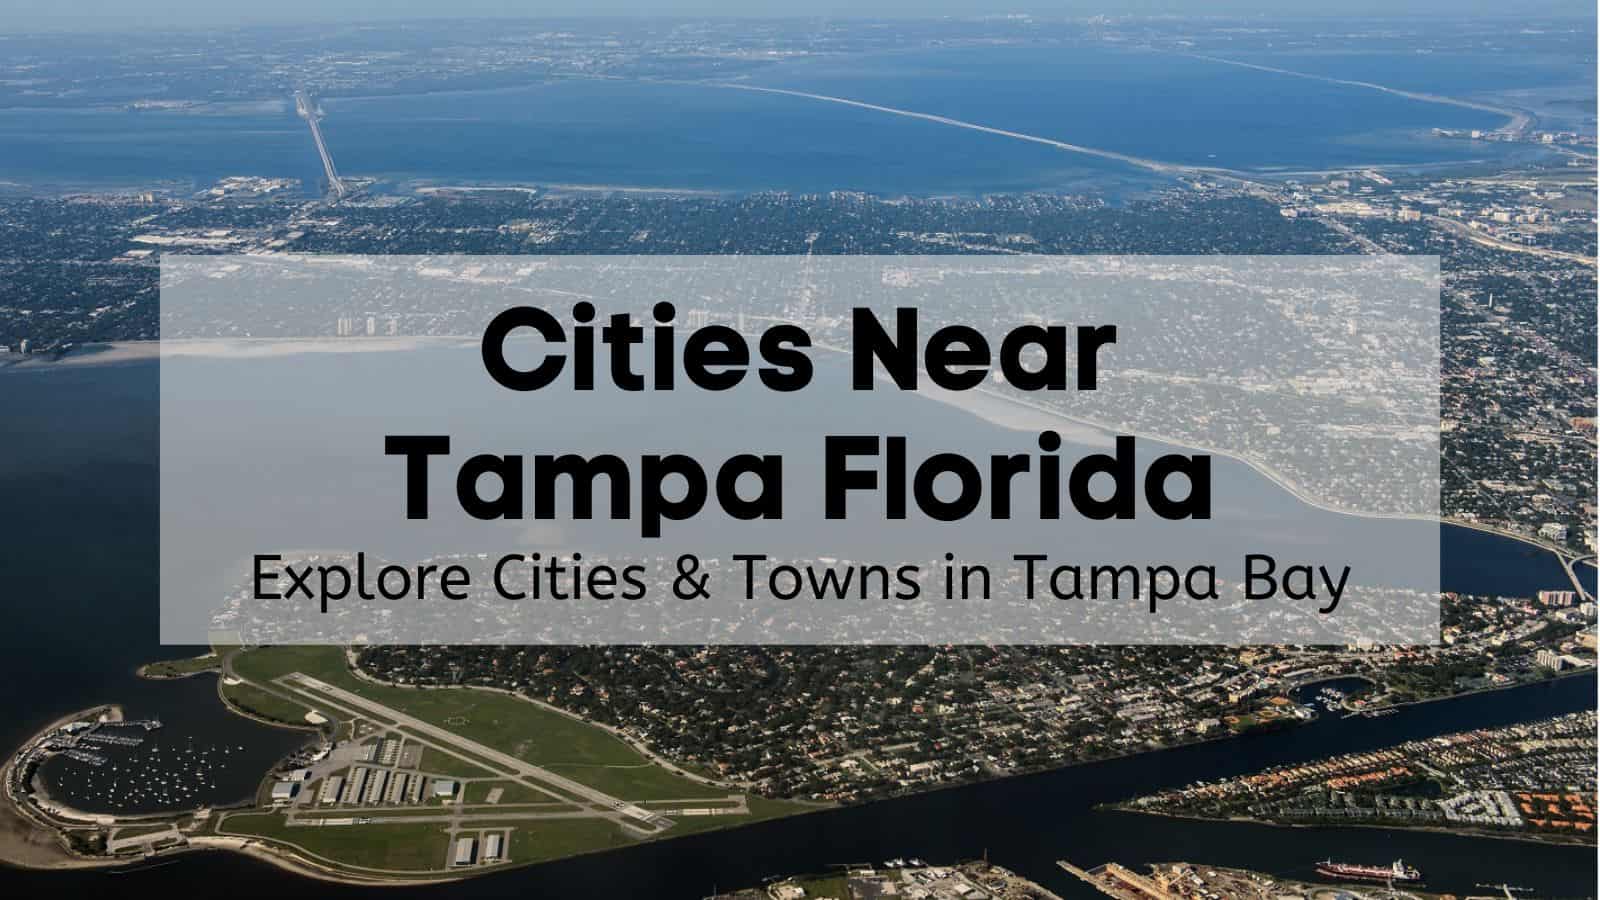 Tampa Bay among the top destinations for people looking to